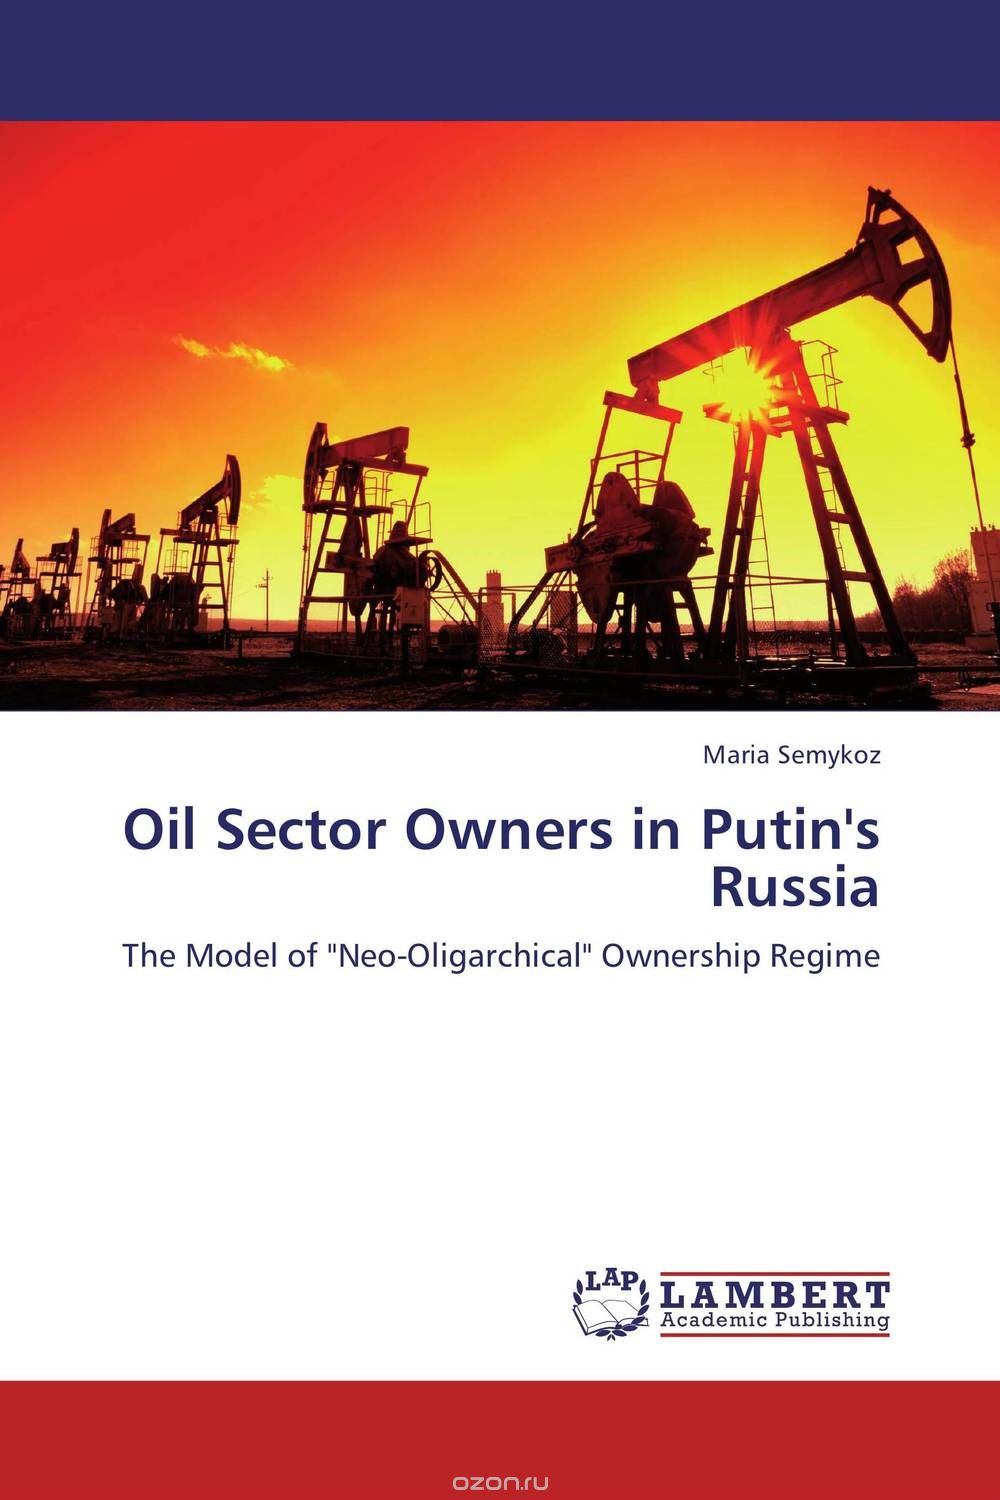 Oil Sector Owners in Putin's Russia